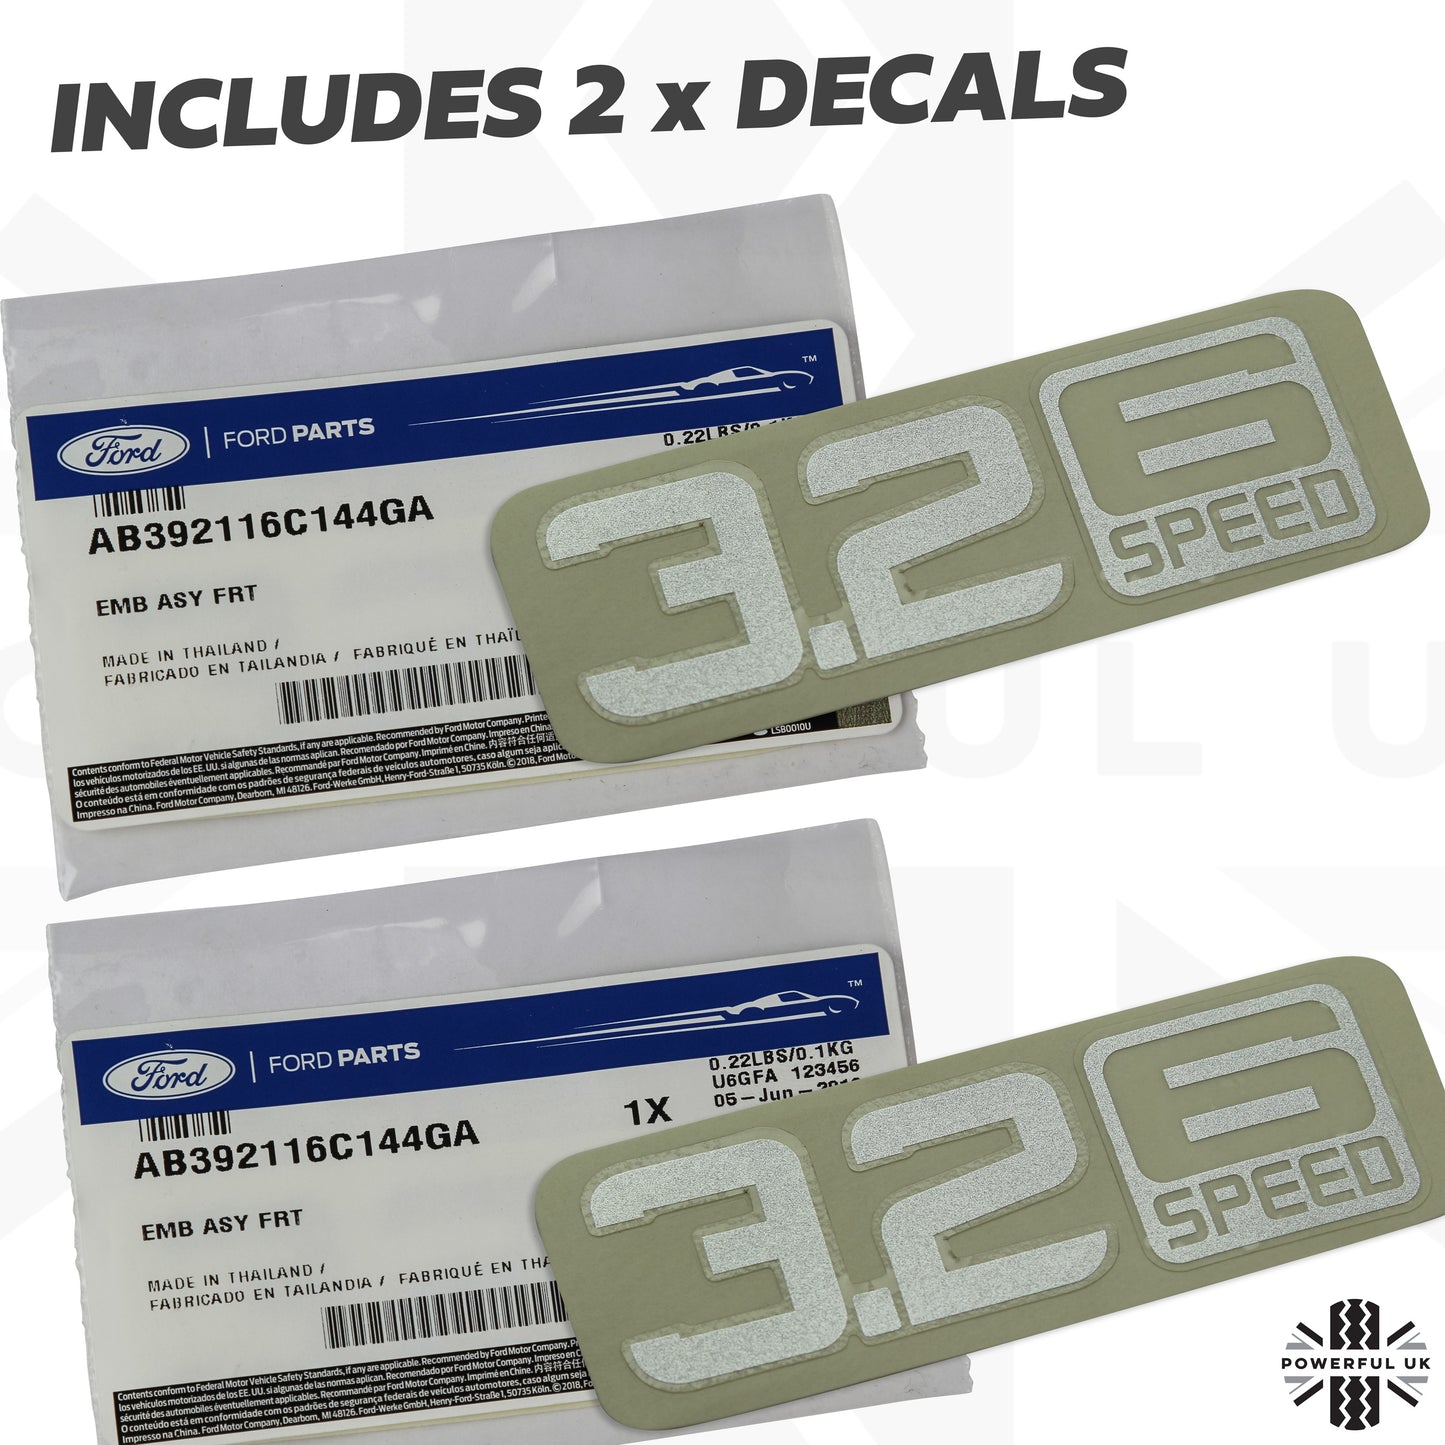 Side Vent Decals x 2 - 3.2 6 SPEED - Silver - for Ford Ranger T6 & T7